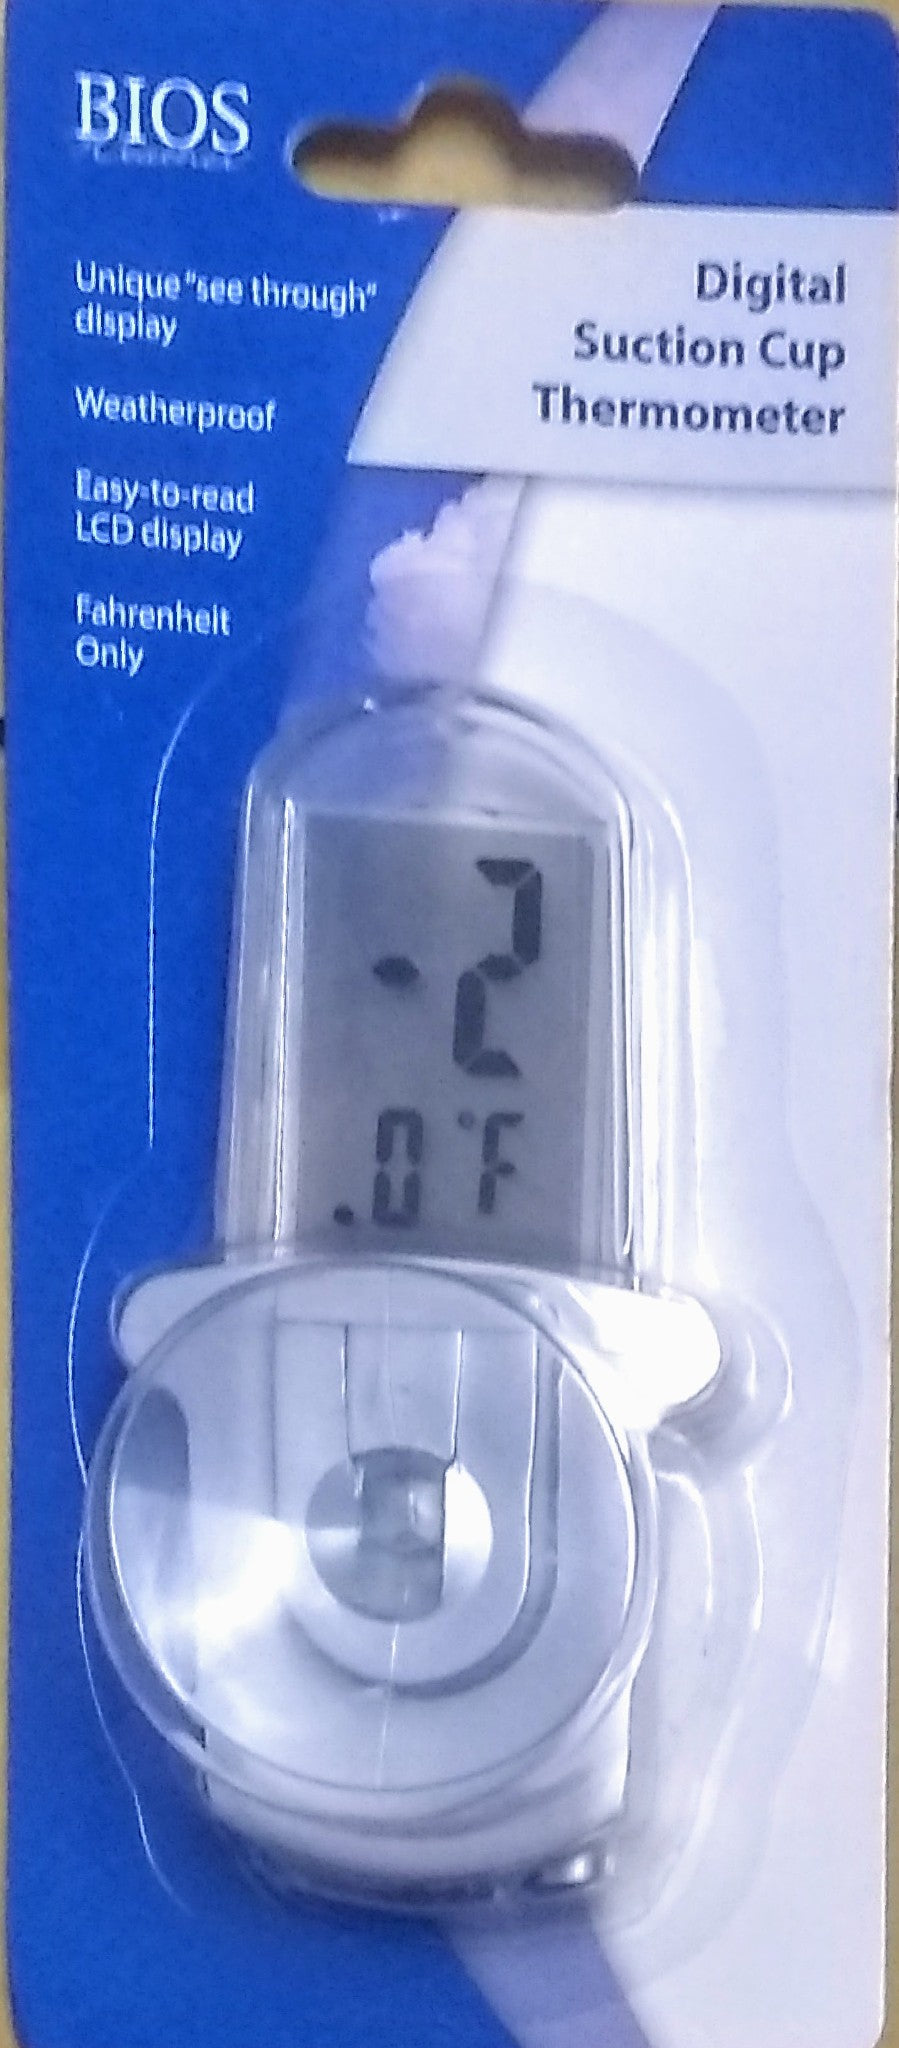 Bios BW918 Digital Suction Cup Thermometer See Through Display Fahrenheit